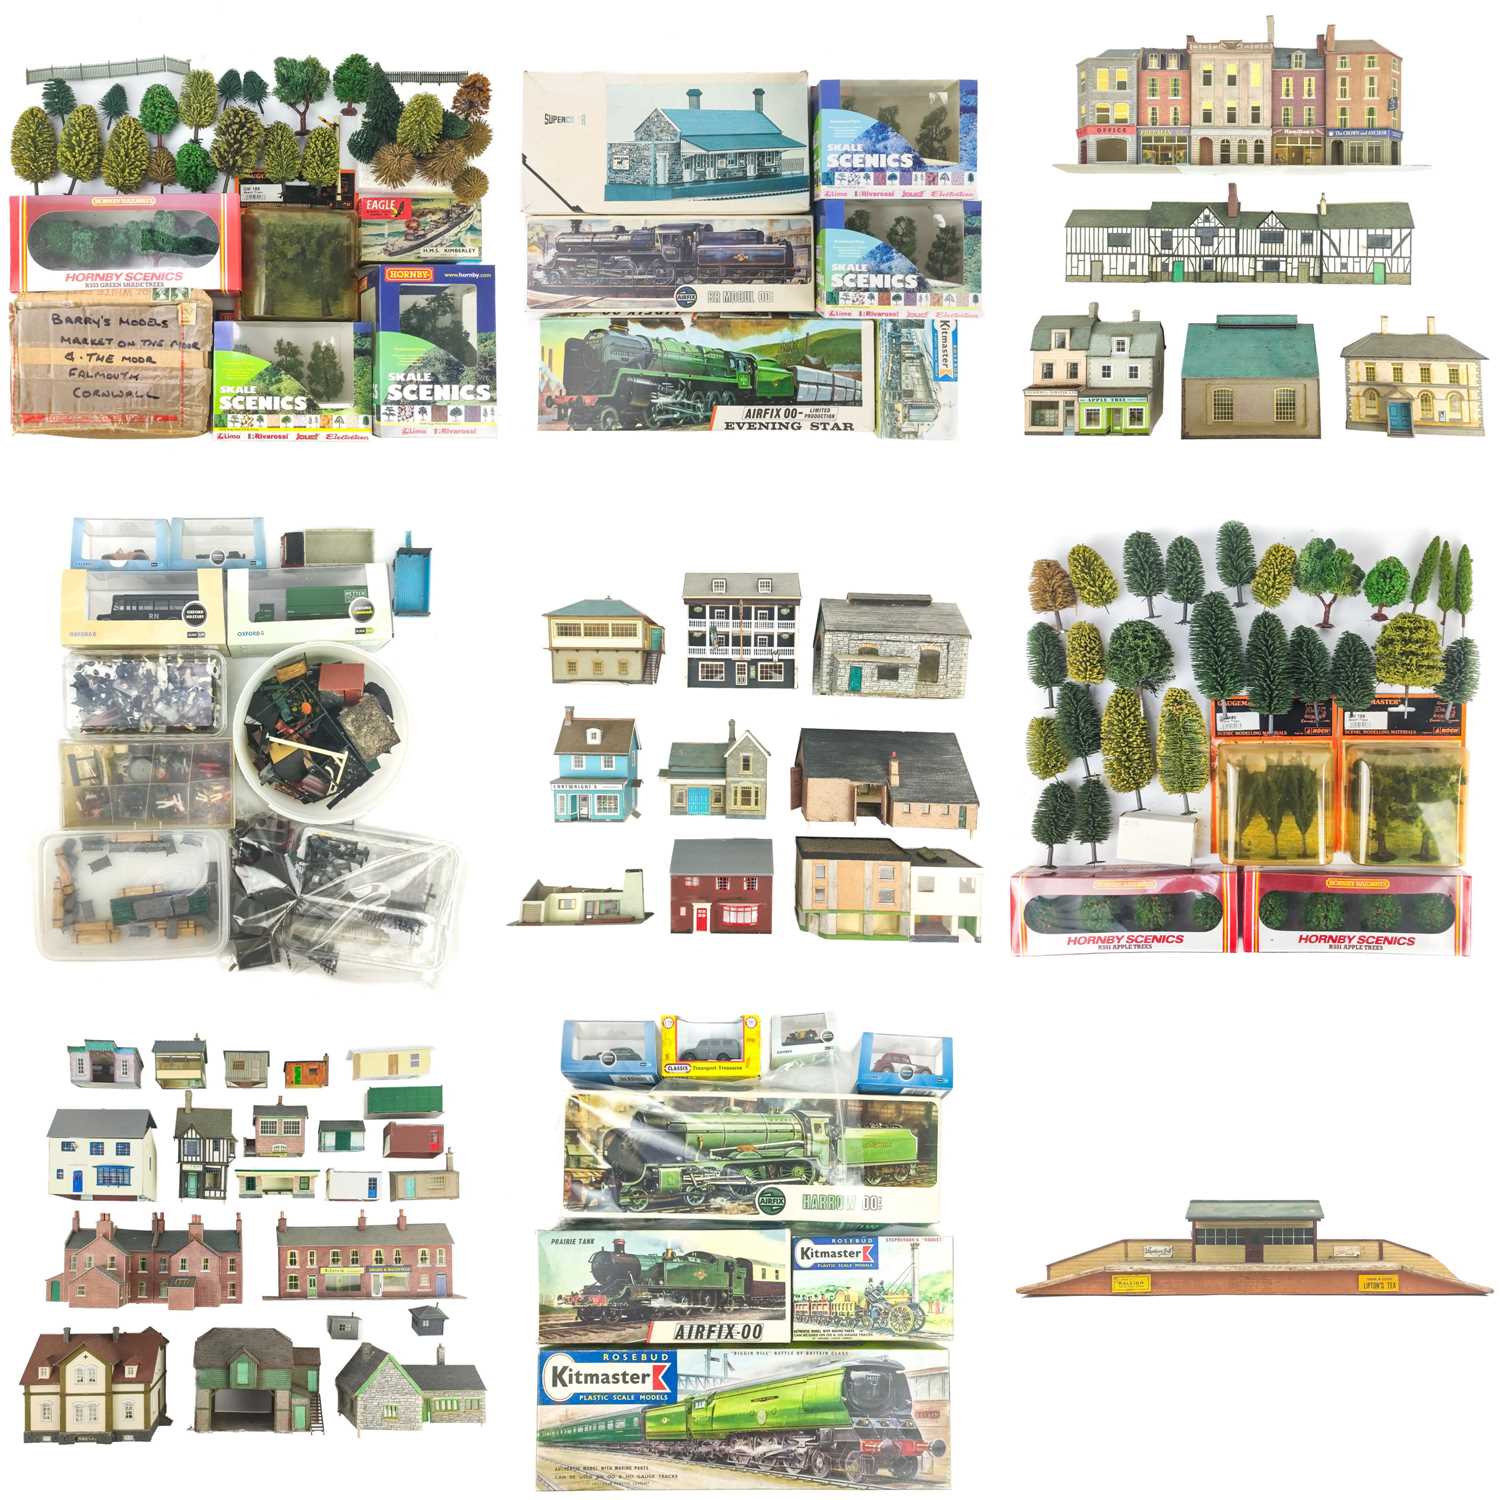 Lot 568 - Model Railway Accessories 00 Gauge including scenery, buildings, trees and model kits